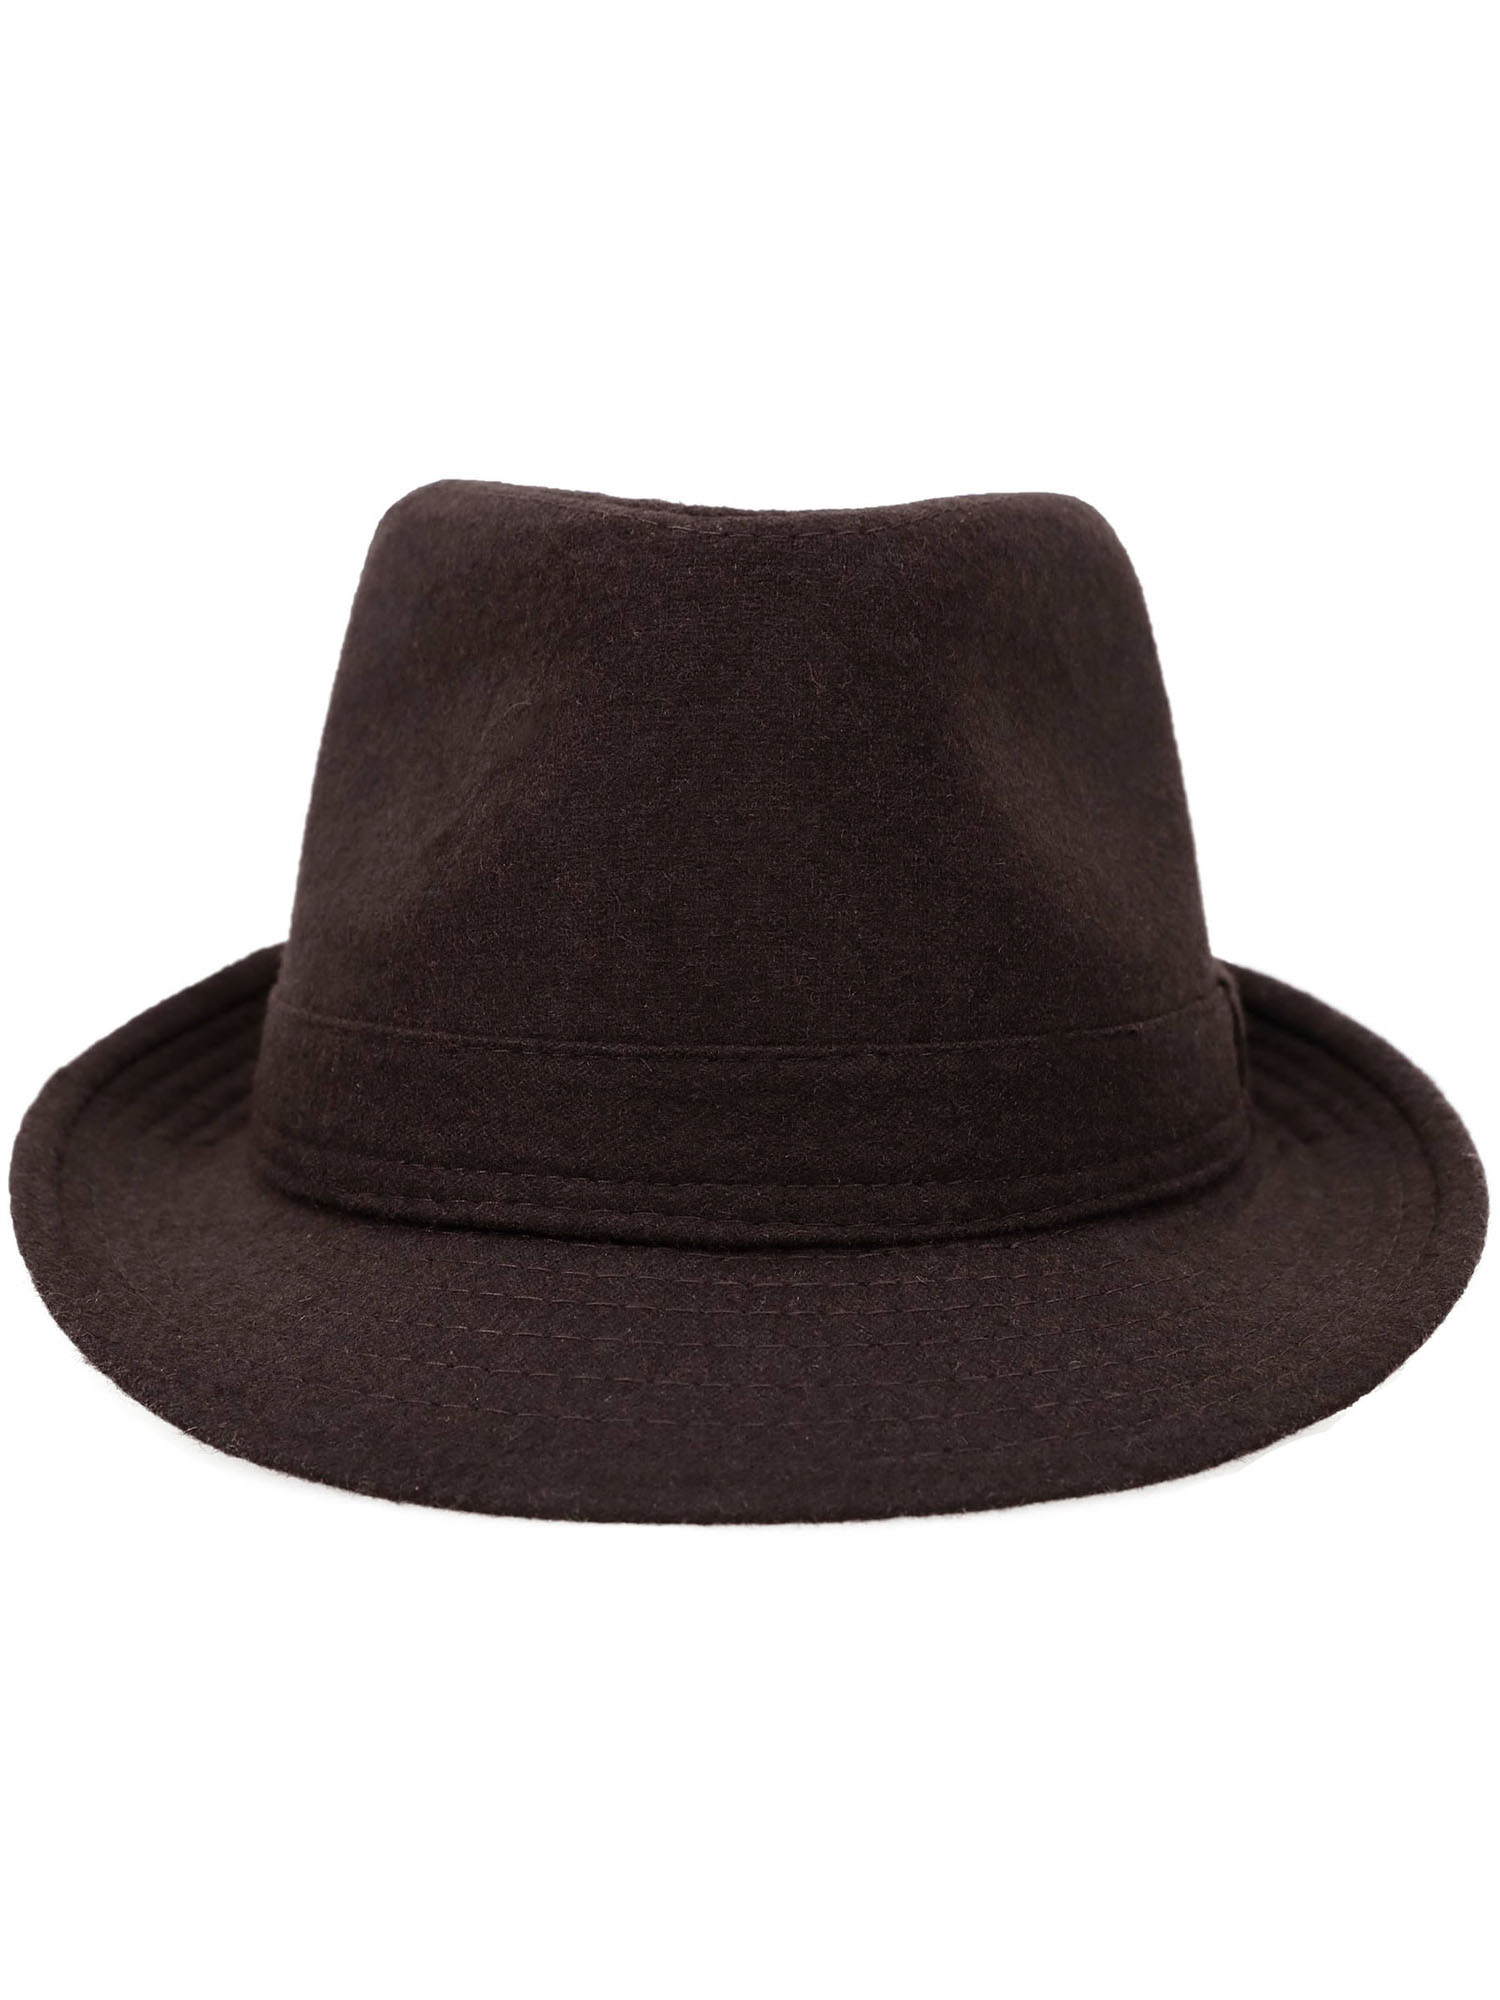 Simplicity Indiana Men's Adult Deluxe Structured Fedora Hat, Brown - image 2 of 4